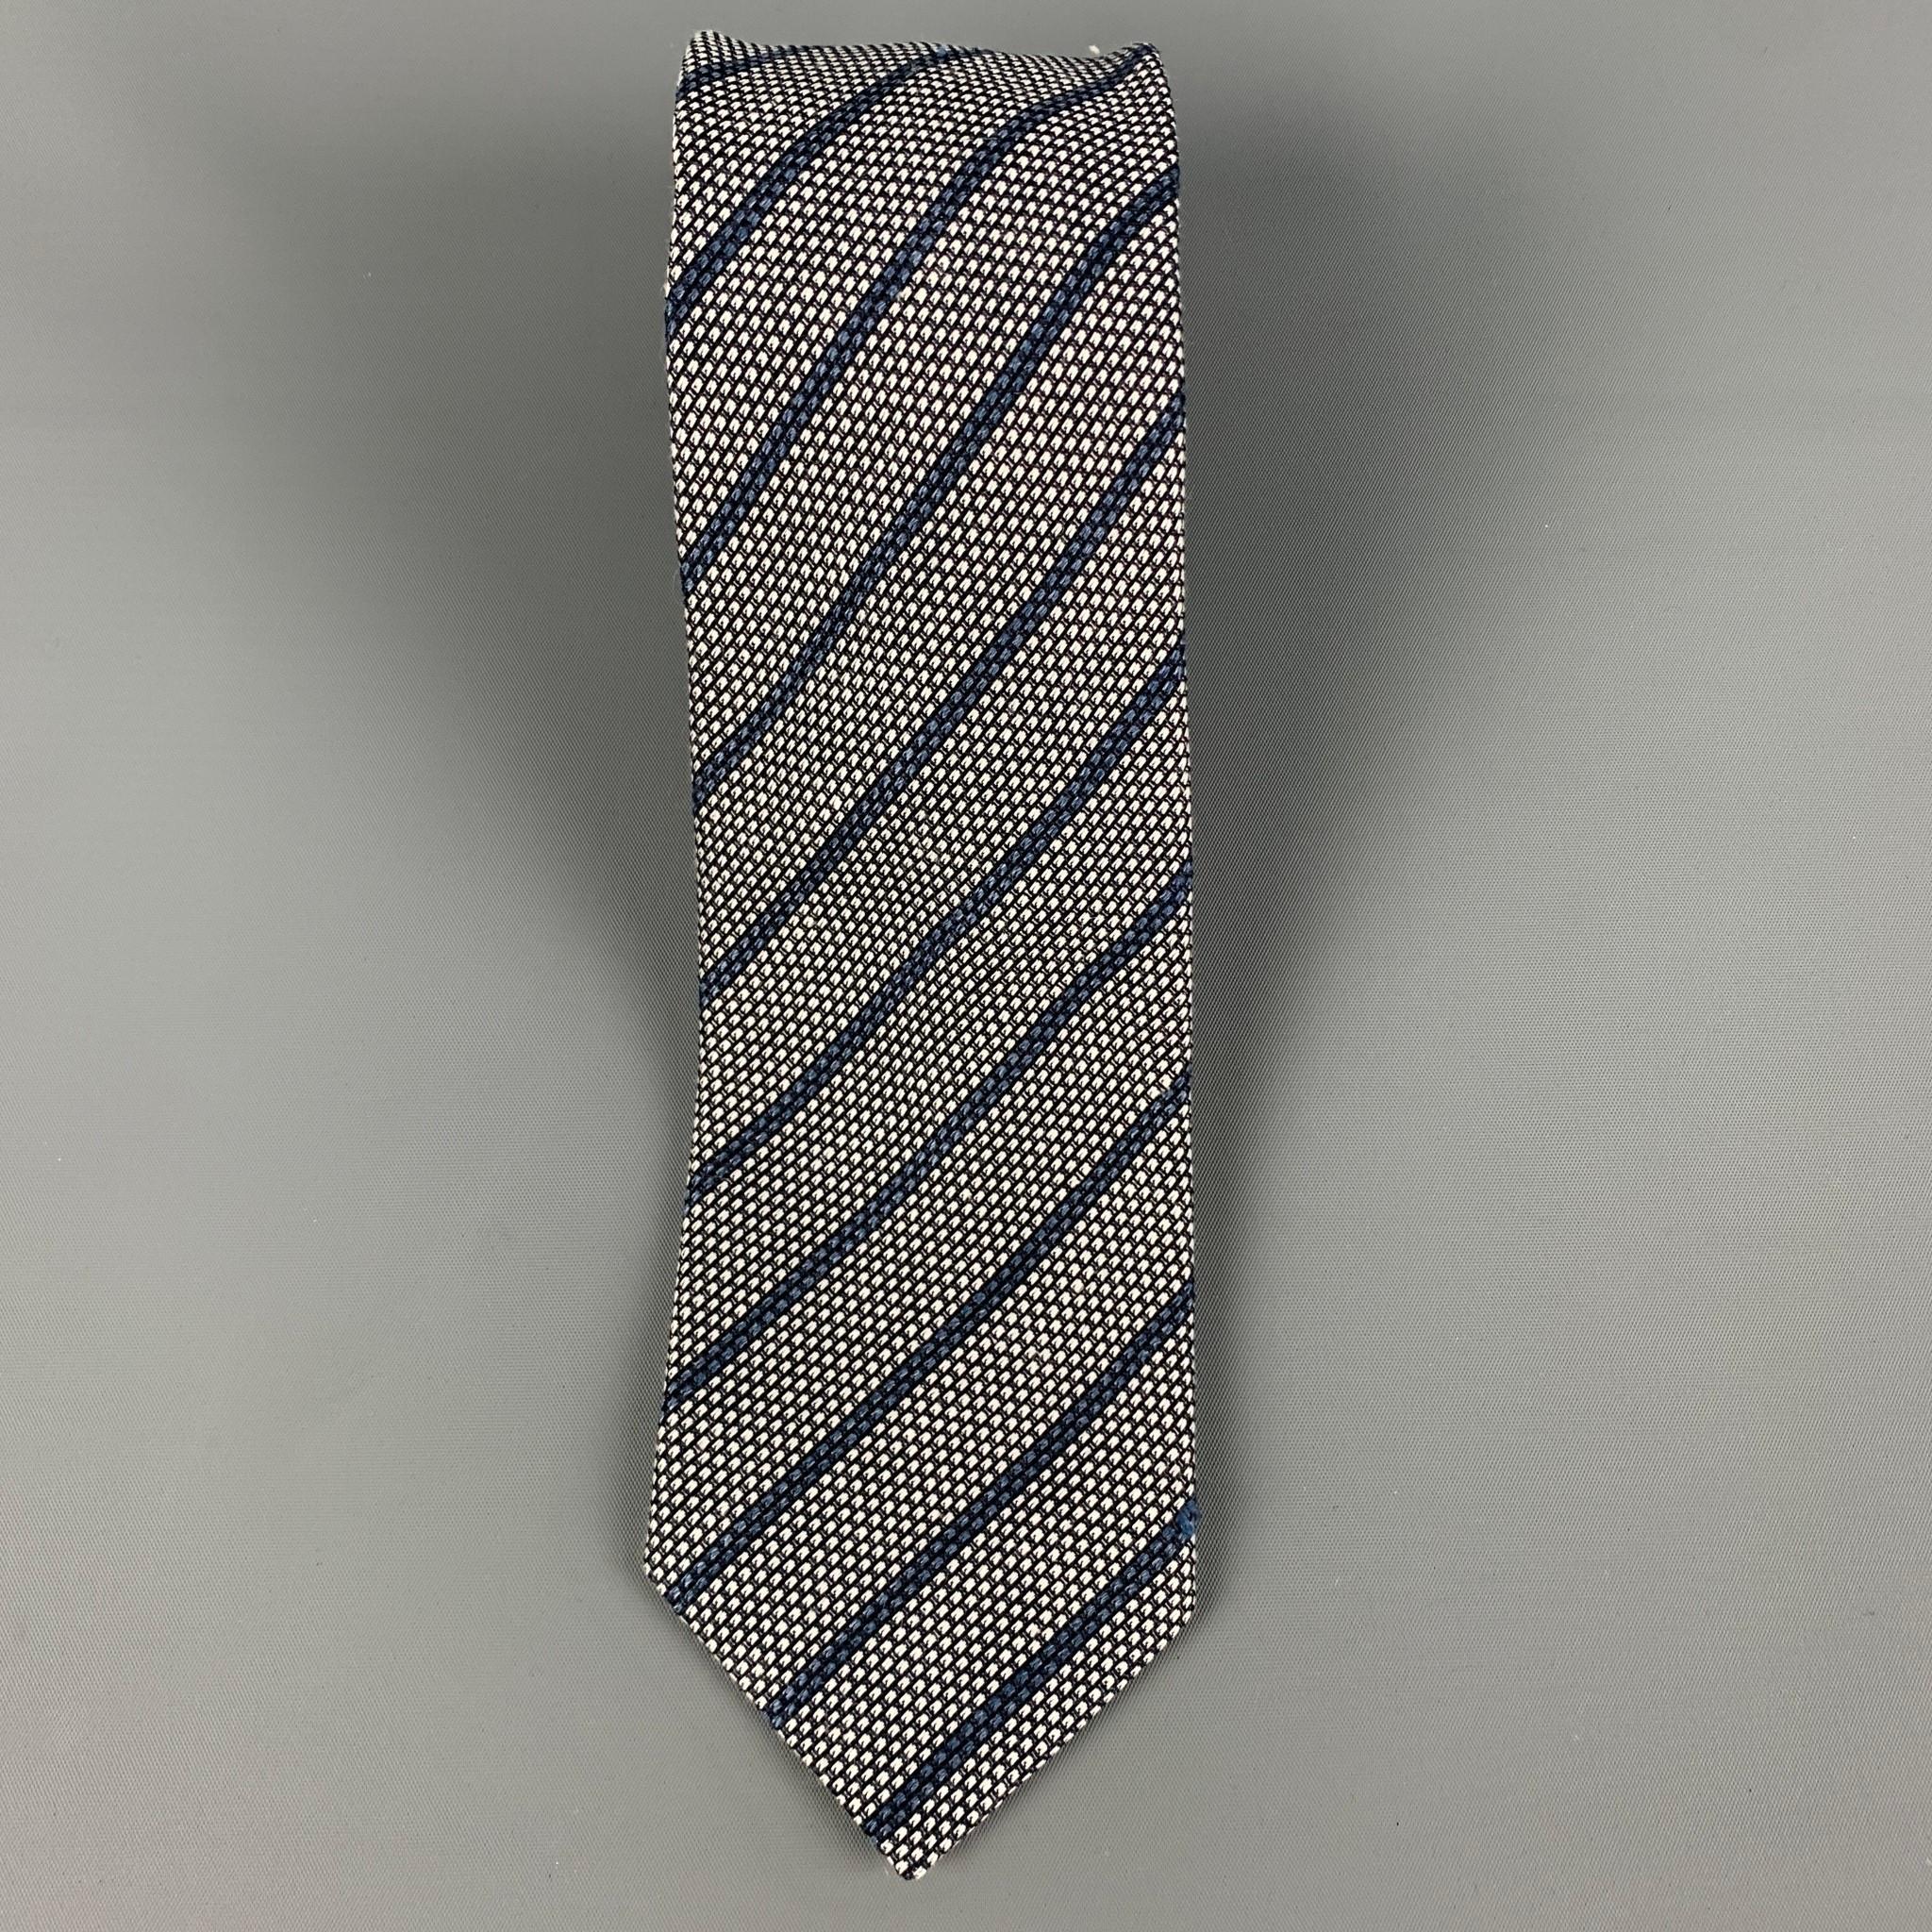 ERMENEGILDO ZEGNA necktie comes in a grey & navy silk with a all over stripe print. Made in Italy.

Excellent Pre-Owned Condition.

Measurements:

Width: 3.2 in. / 8 cm.
Length: 60 in. / 152 cm. 